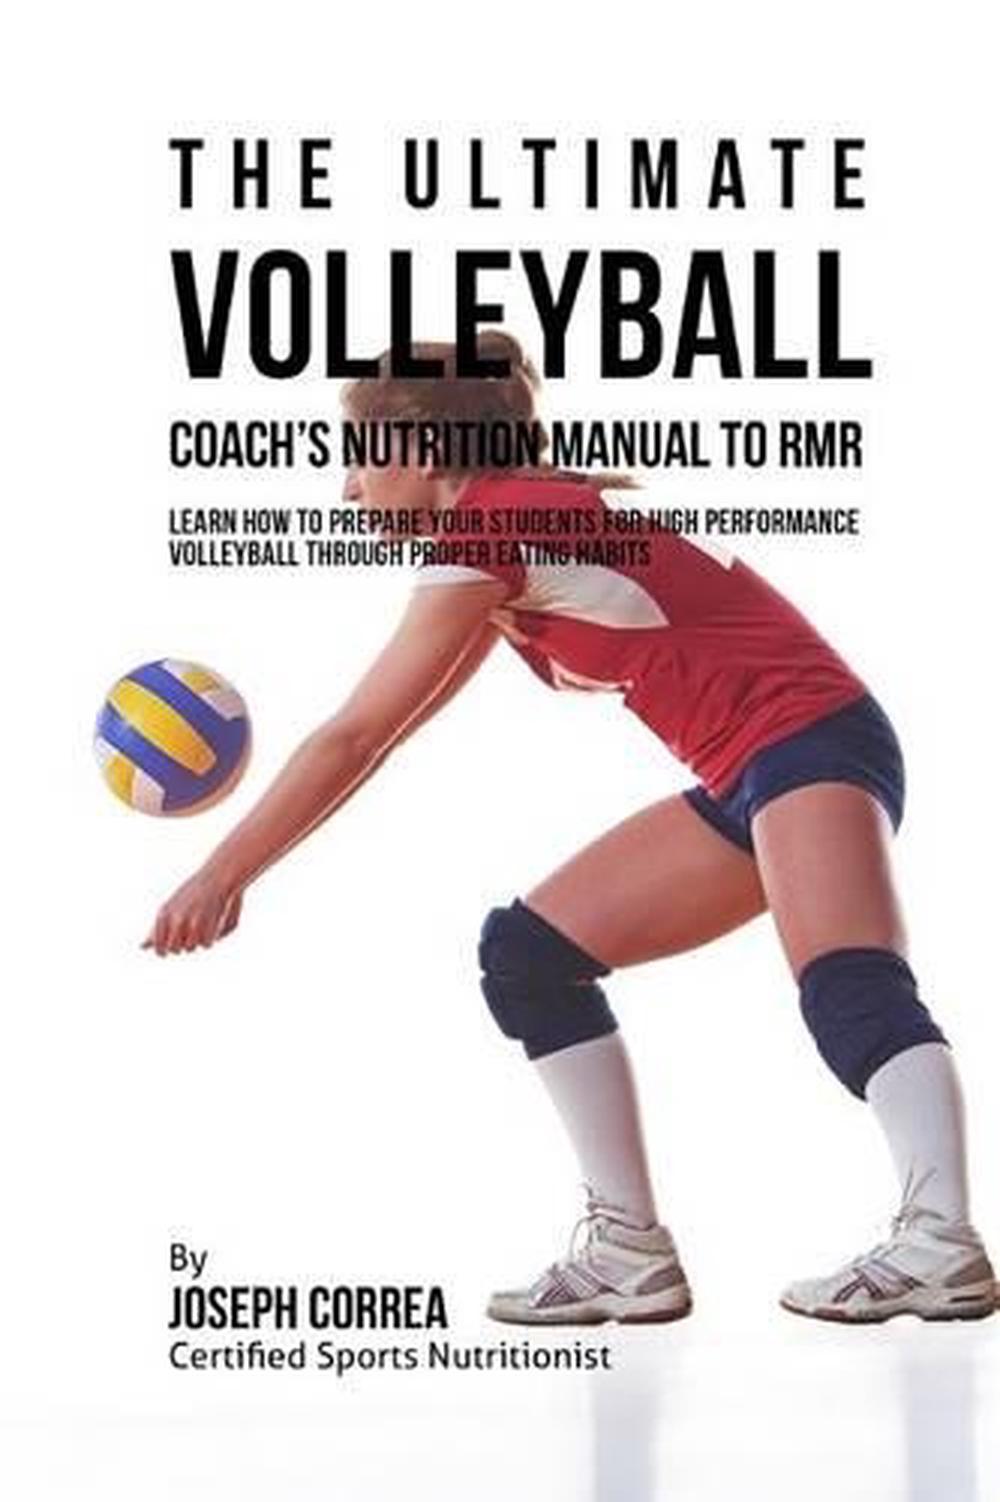 volleyball coaching websites